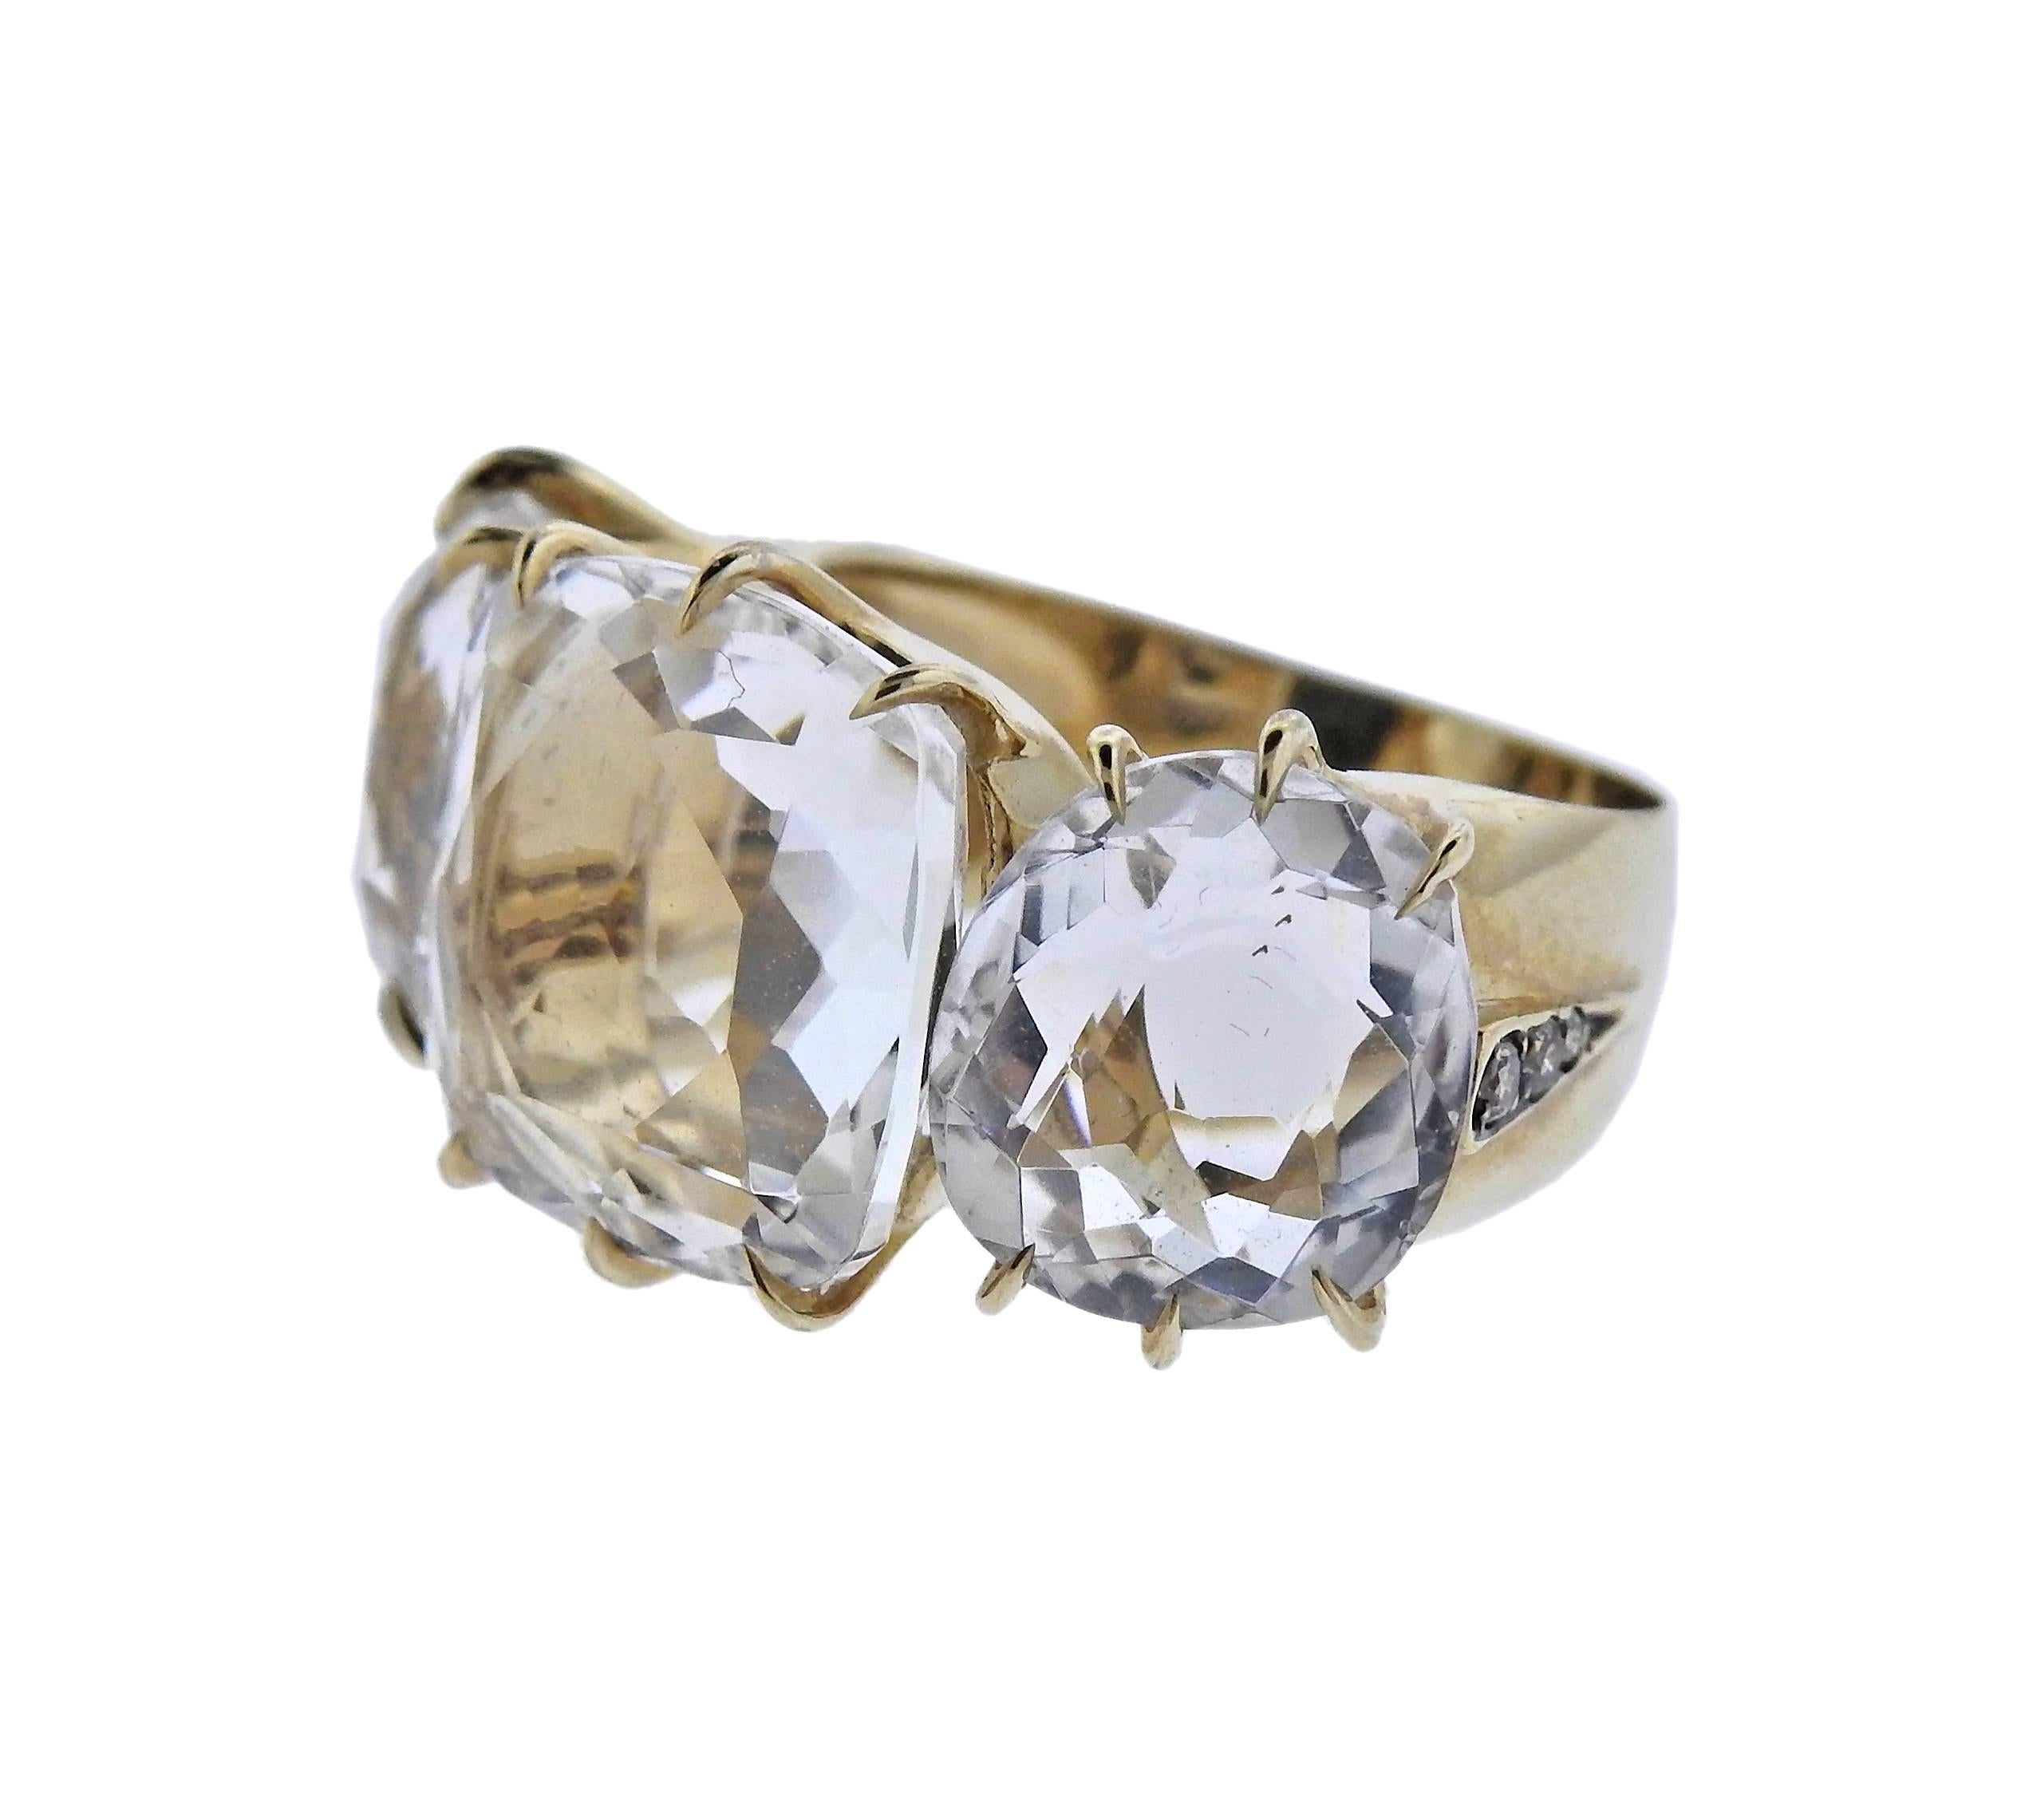 18k gold Moonlight collection ring, set with three faceted crystals.  Crafted by H. Stern, ring is size 5 1/2, ring top is 13mm x 25mm, weighs 9.5 grams. Marked: 750, Star and S marks.